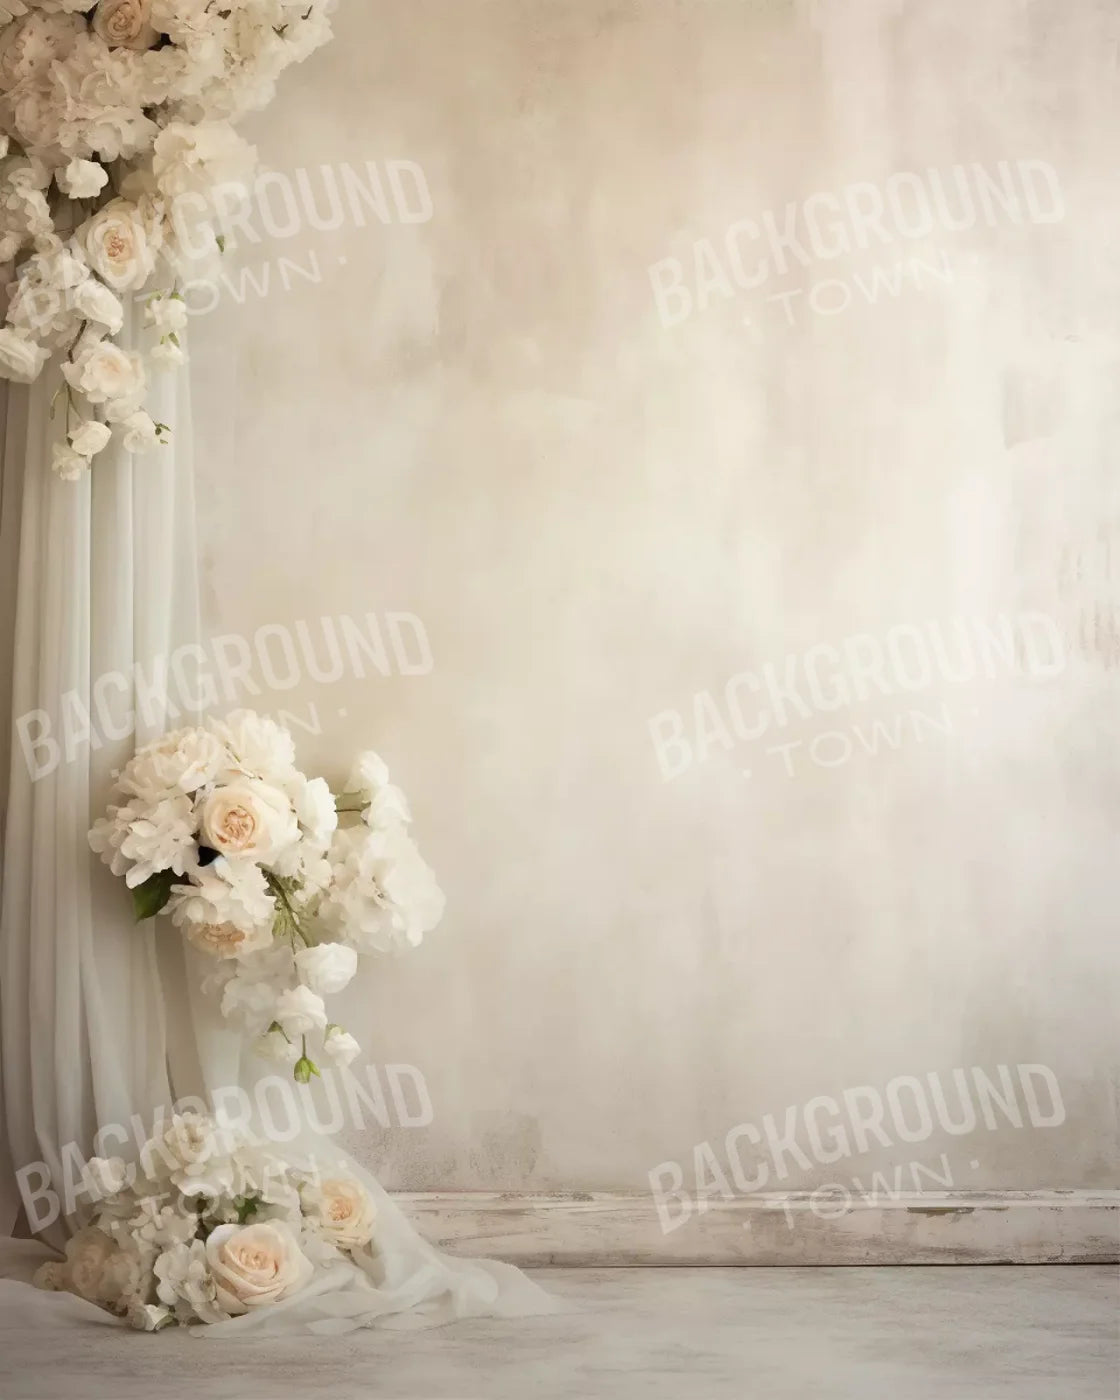 Plaster Wall With Florals 8’X10’ Fleece (96 X 120 Inch) Backdrop